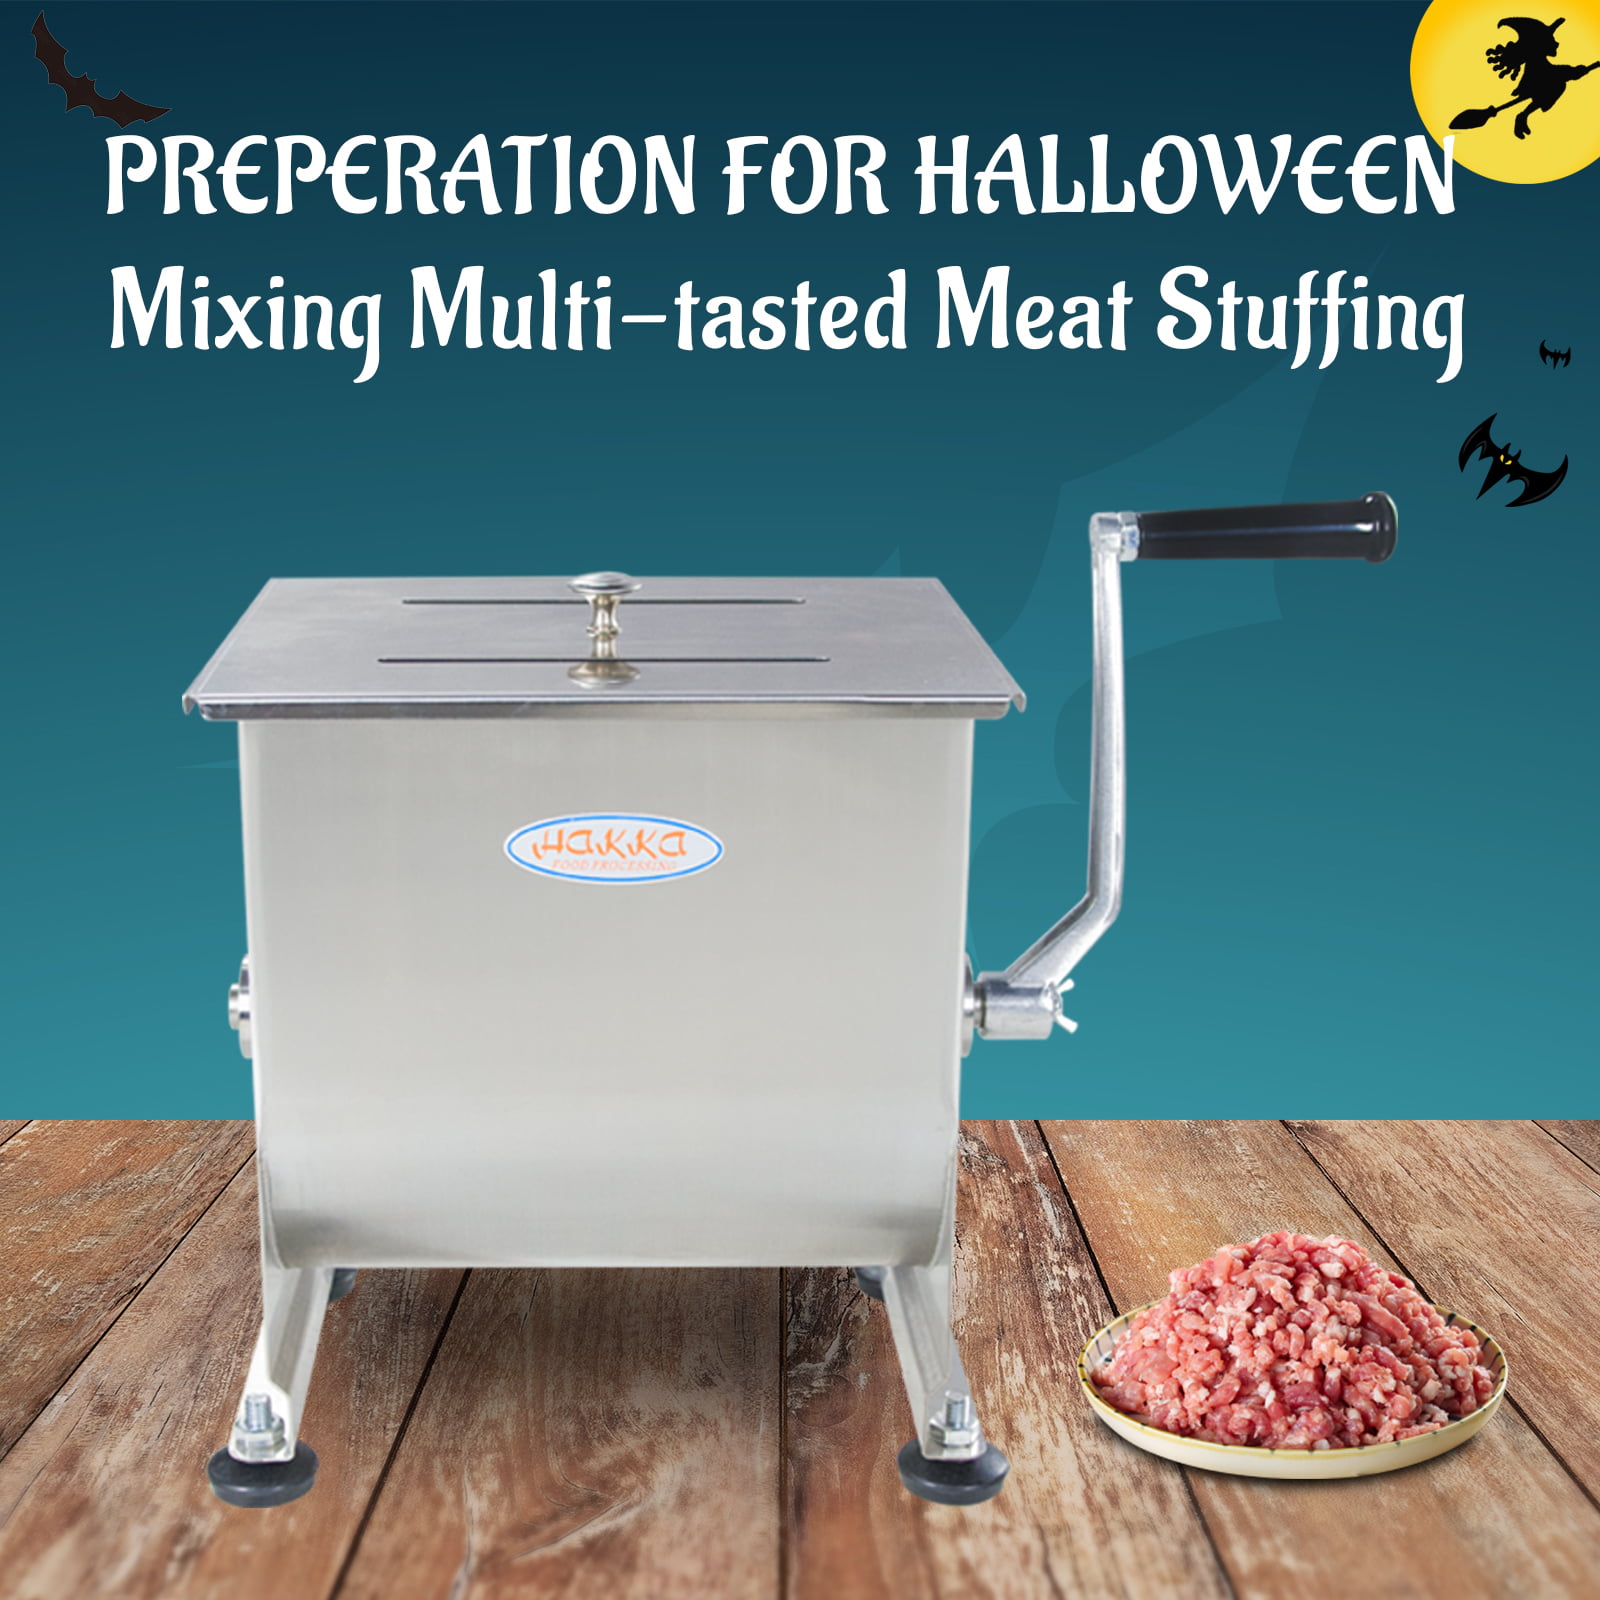 Guide Gear Stainless Steel Meat Mixer 4.2 Gallon Capacity 